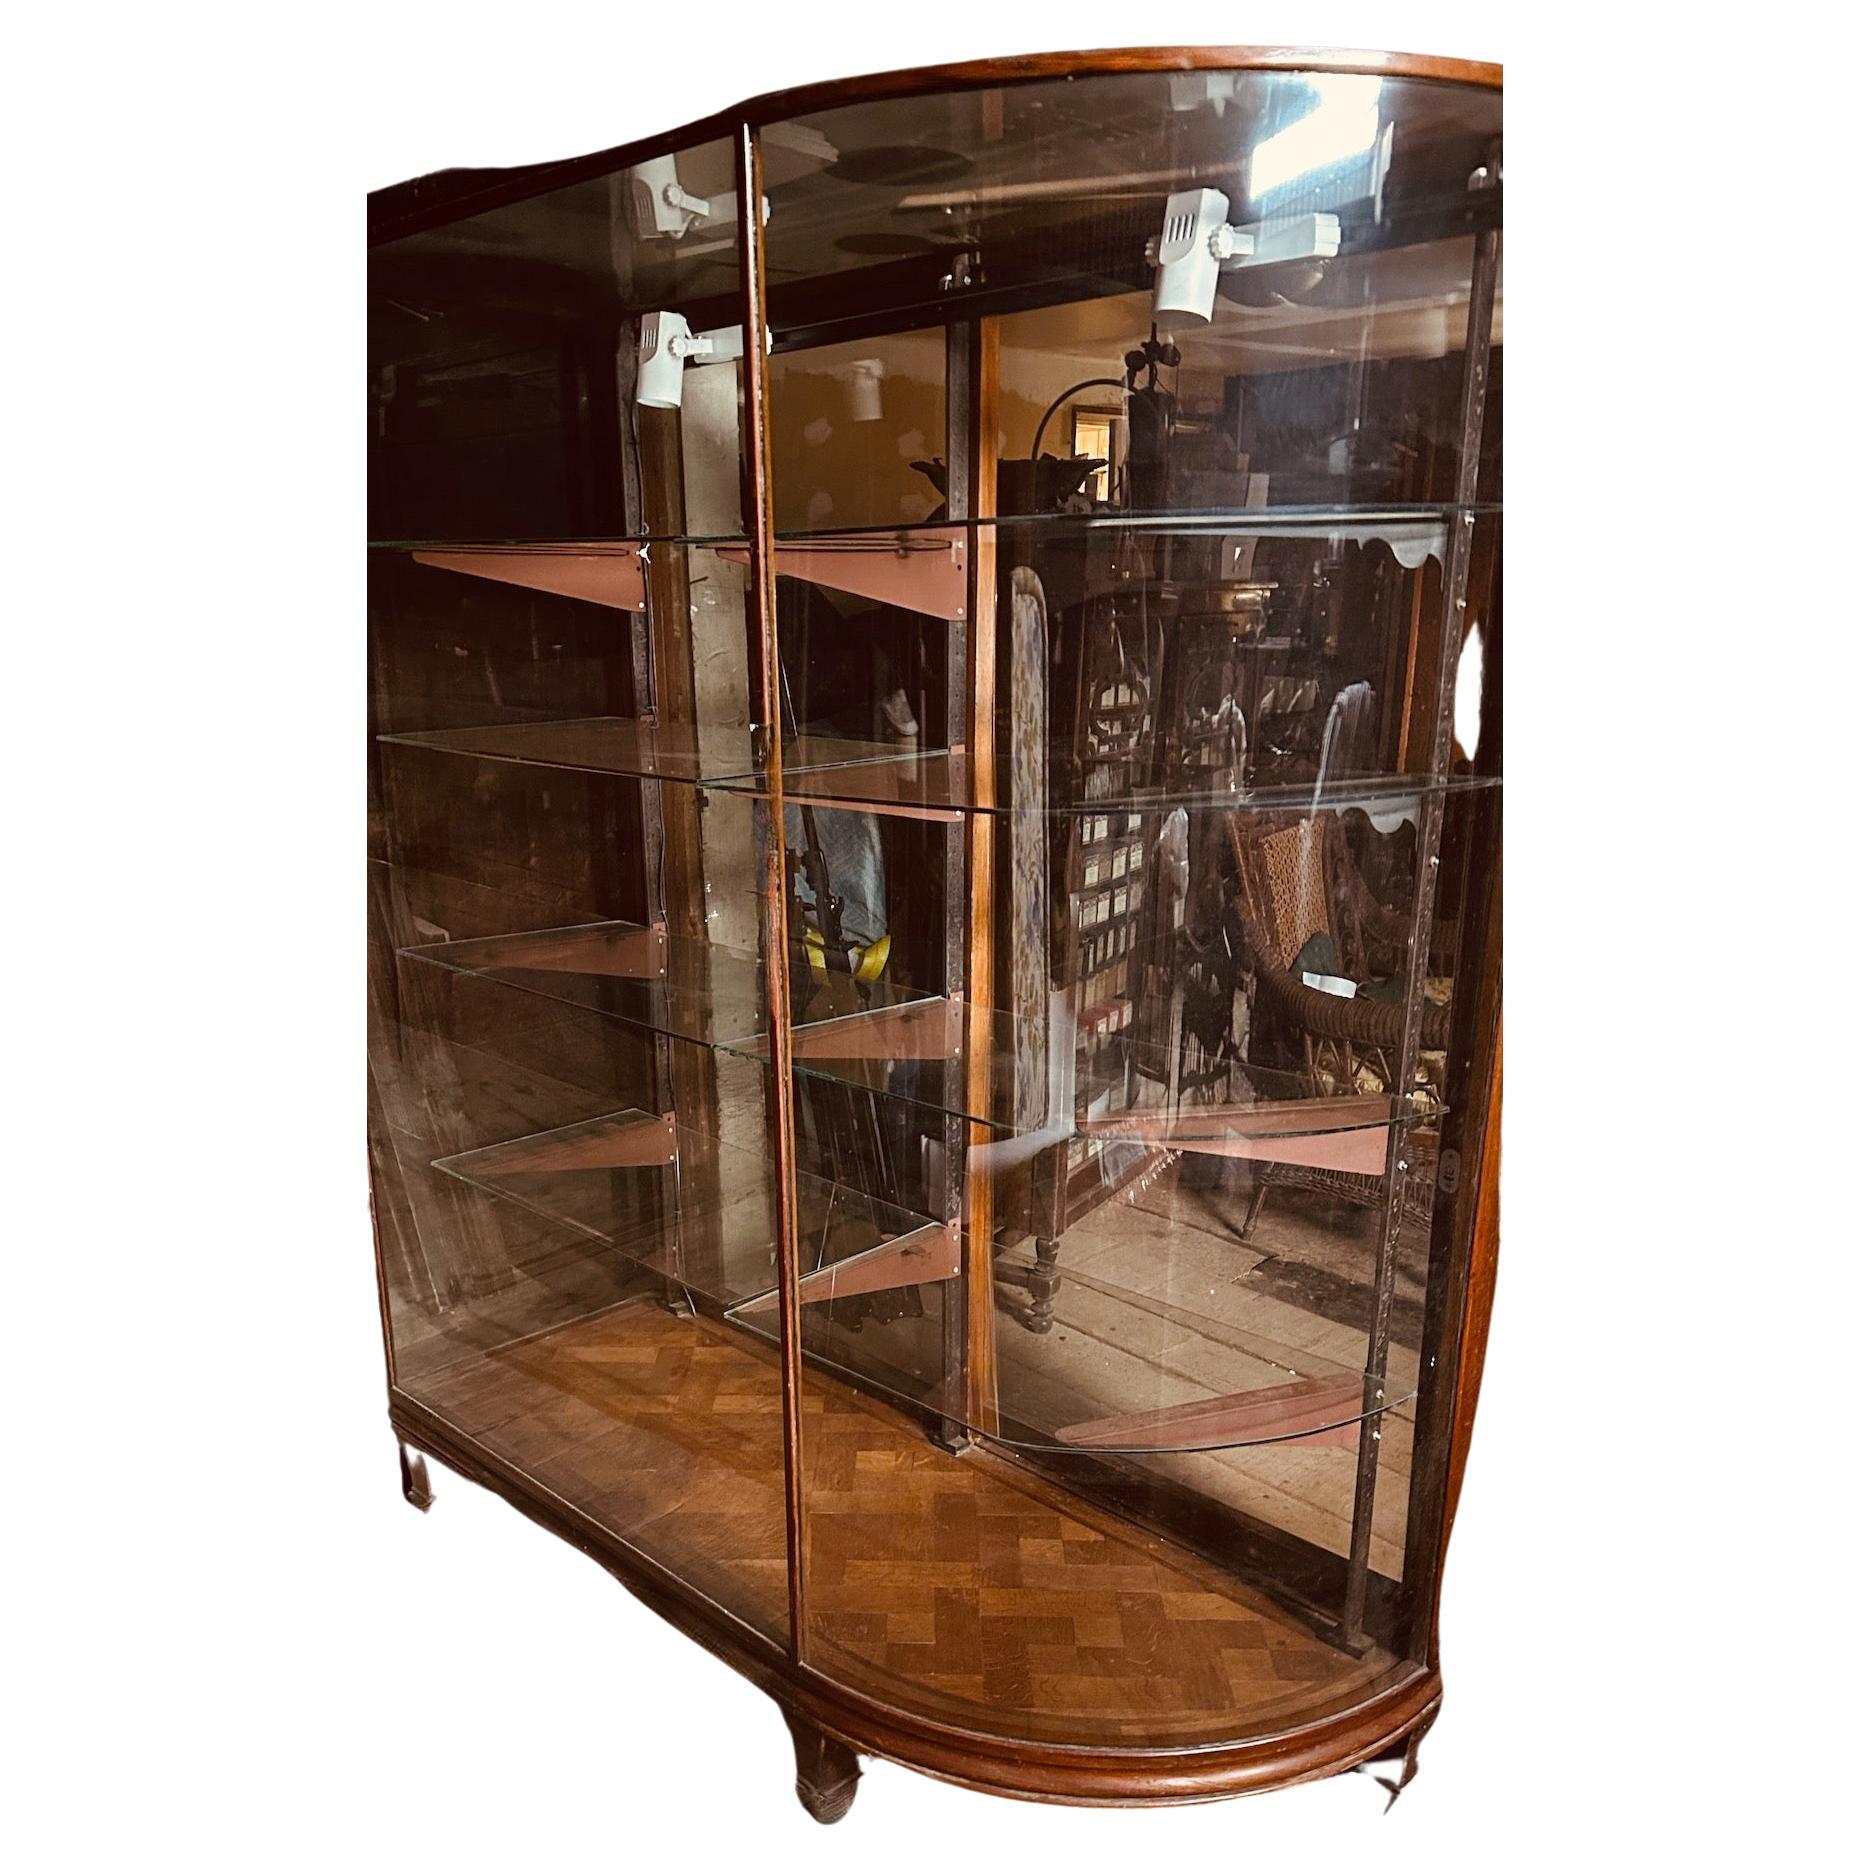 A pair of incredible bow glass sided show cases from one of the exclusive ladies fashion shops in the Newbury Street area of Boston,Ma. These spectacularly designed glass show cases date from the late 19th C. and are handsomely wood trimmed with